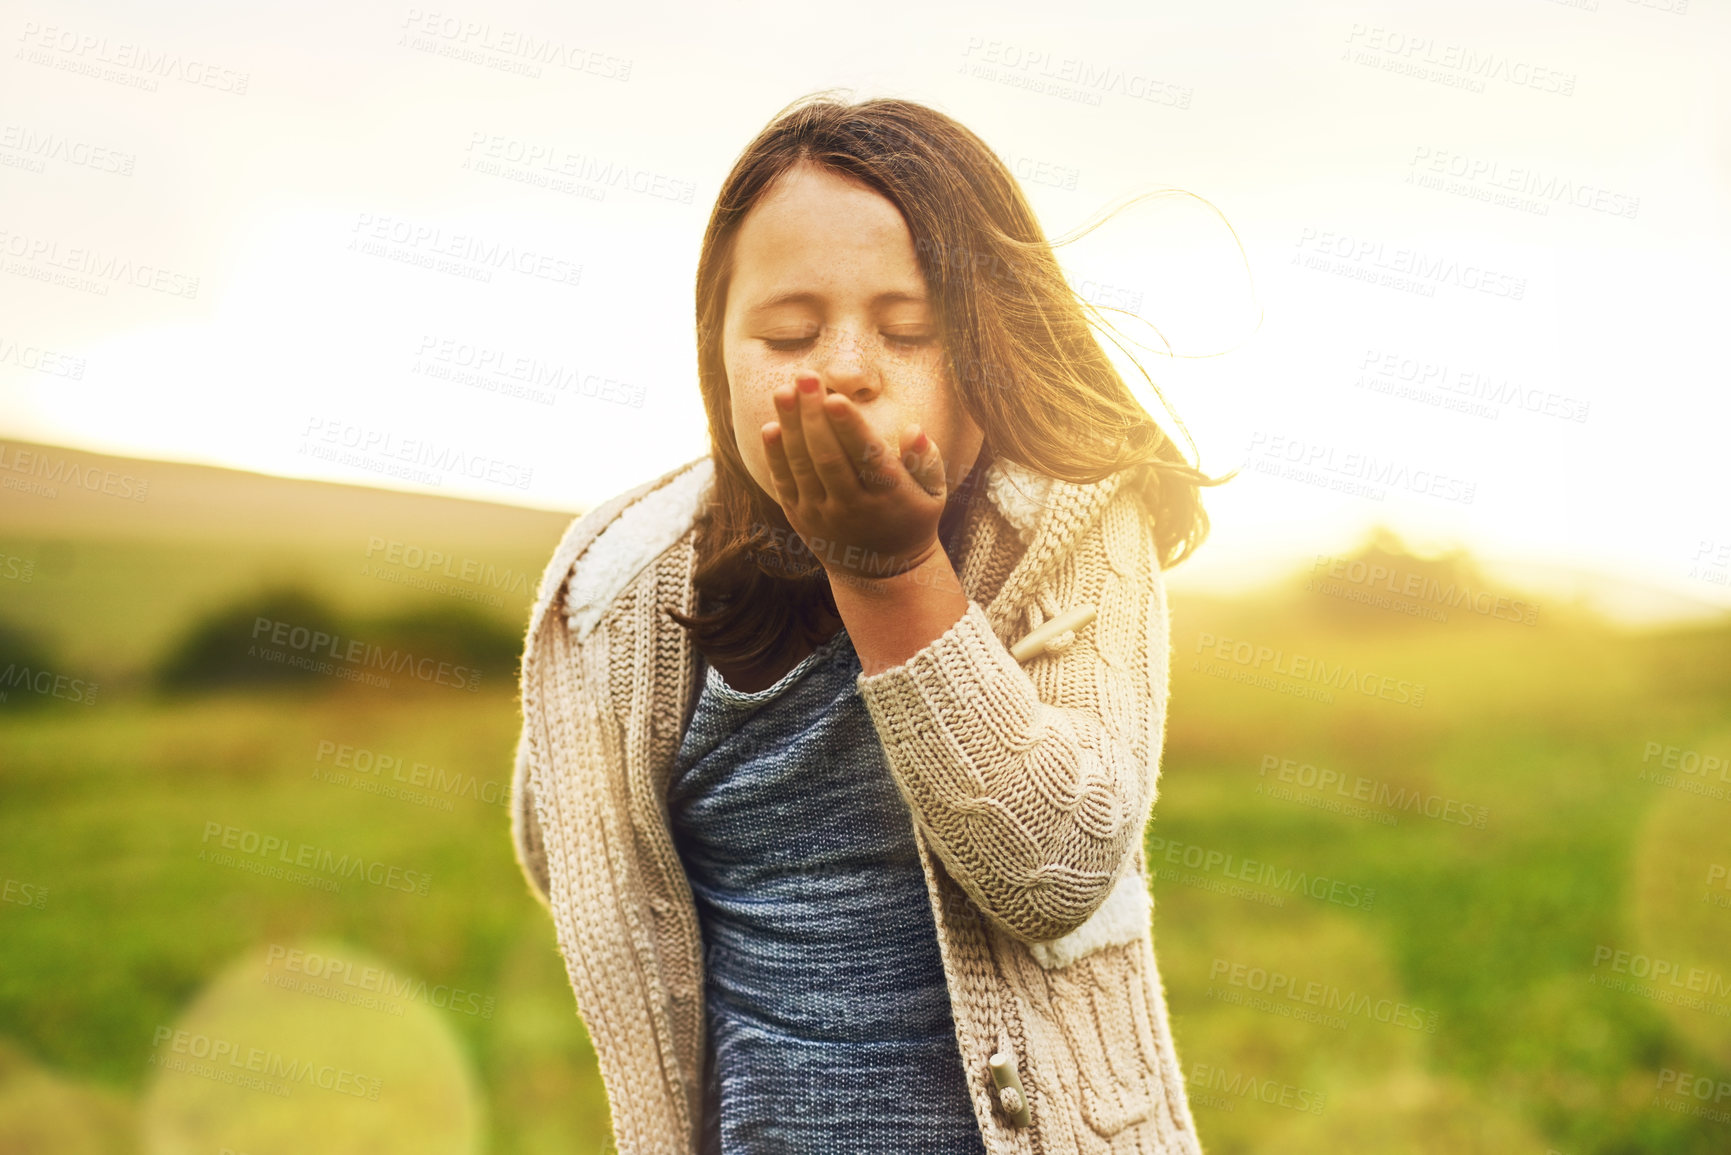 Buy stock photo Portrait of a sweet little girl blowing a kiss while standing outside